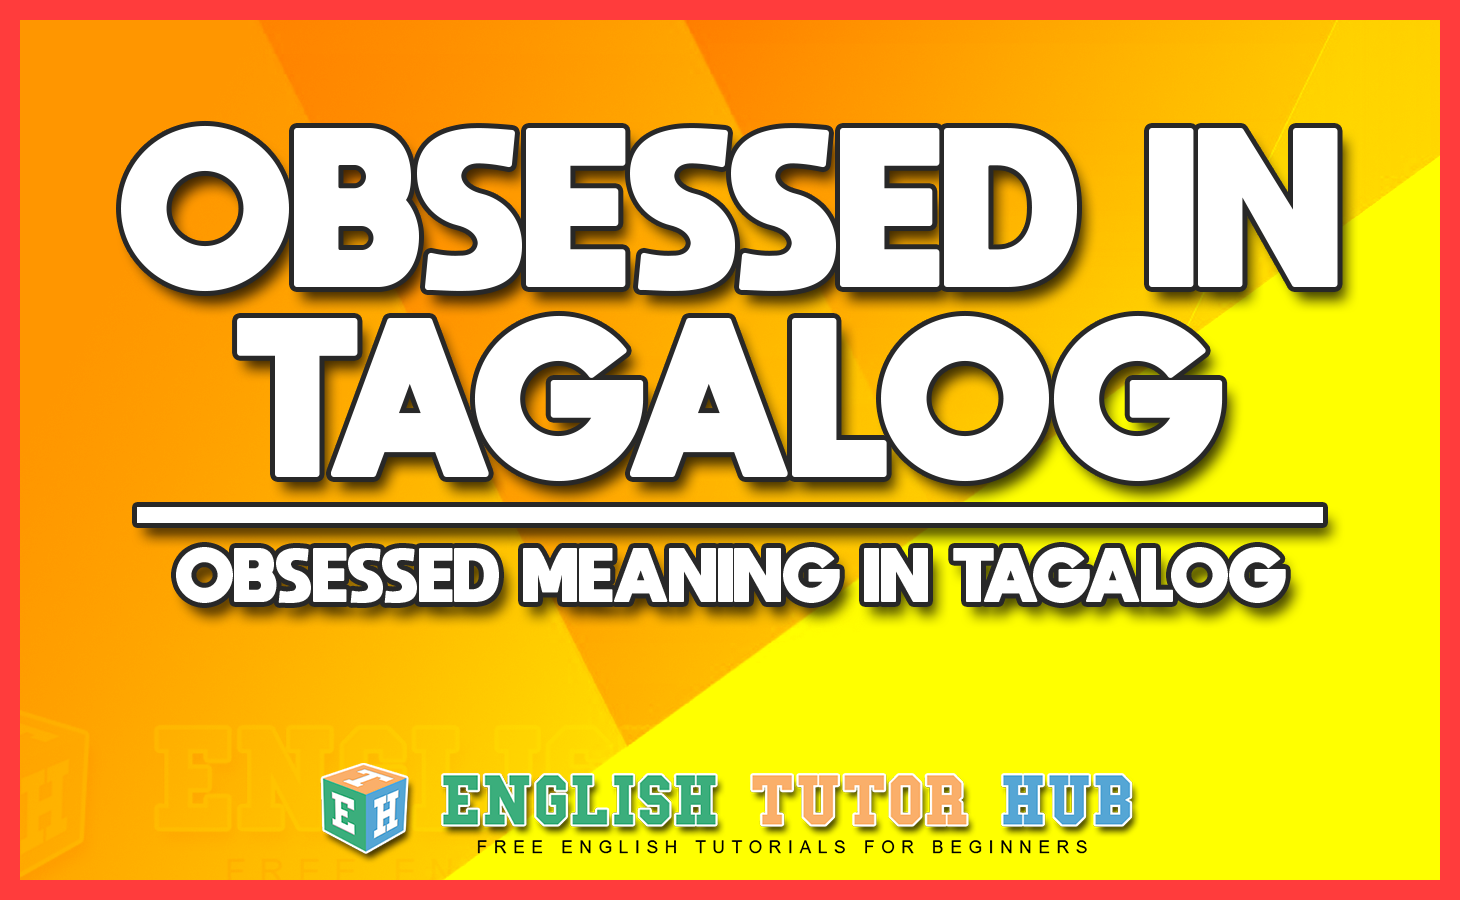 Obsessed in Tagalog - Obsessed Meaning in Tagalog